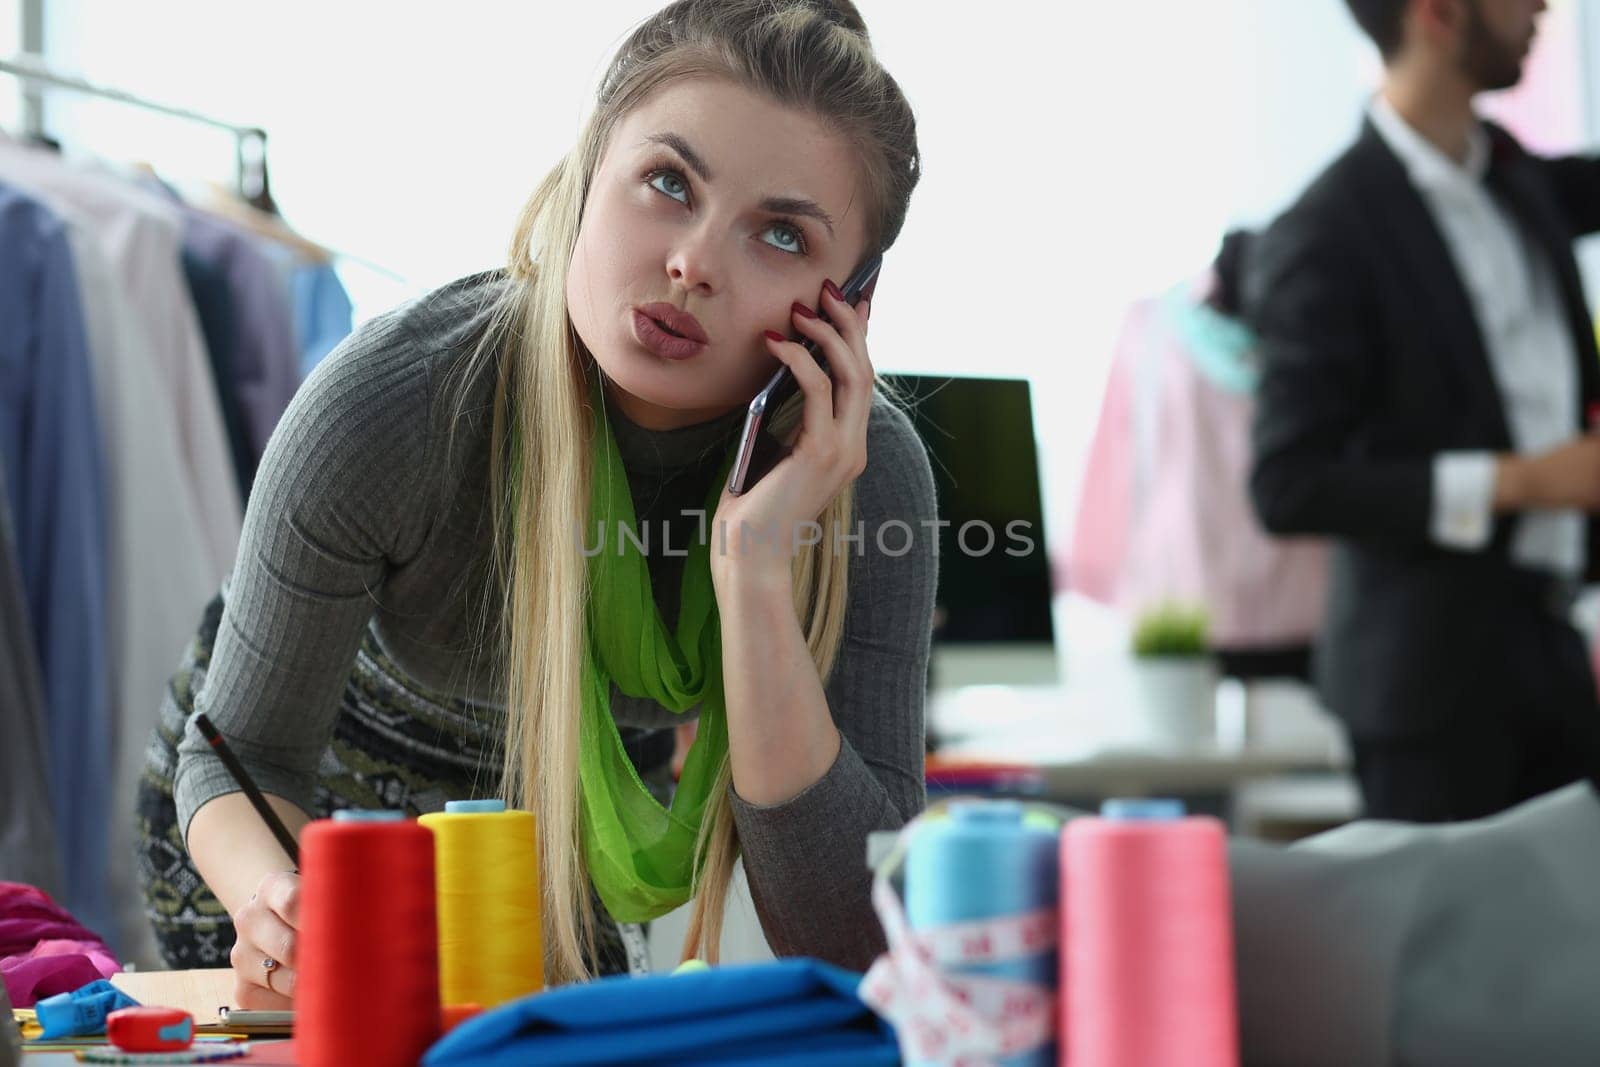 Creative designer manager stylist offers tailoring design option over phone. Seamstress woman talking to client on smartphone